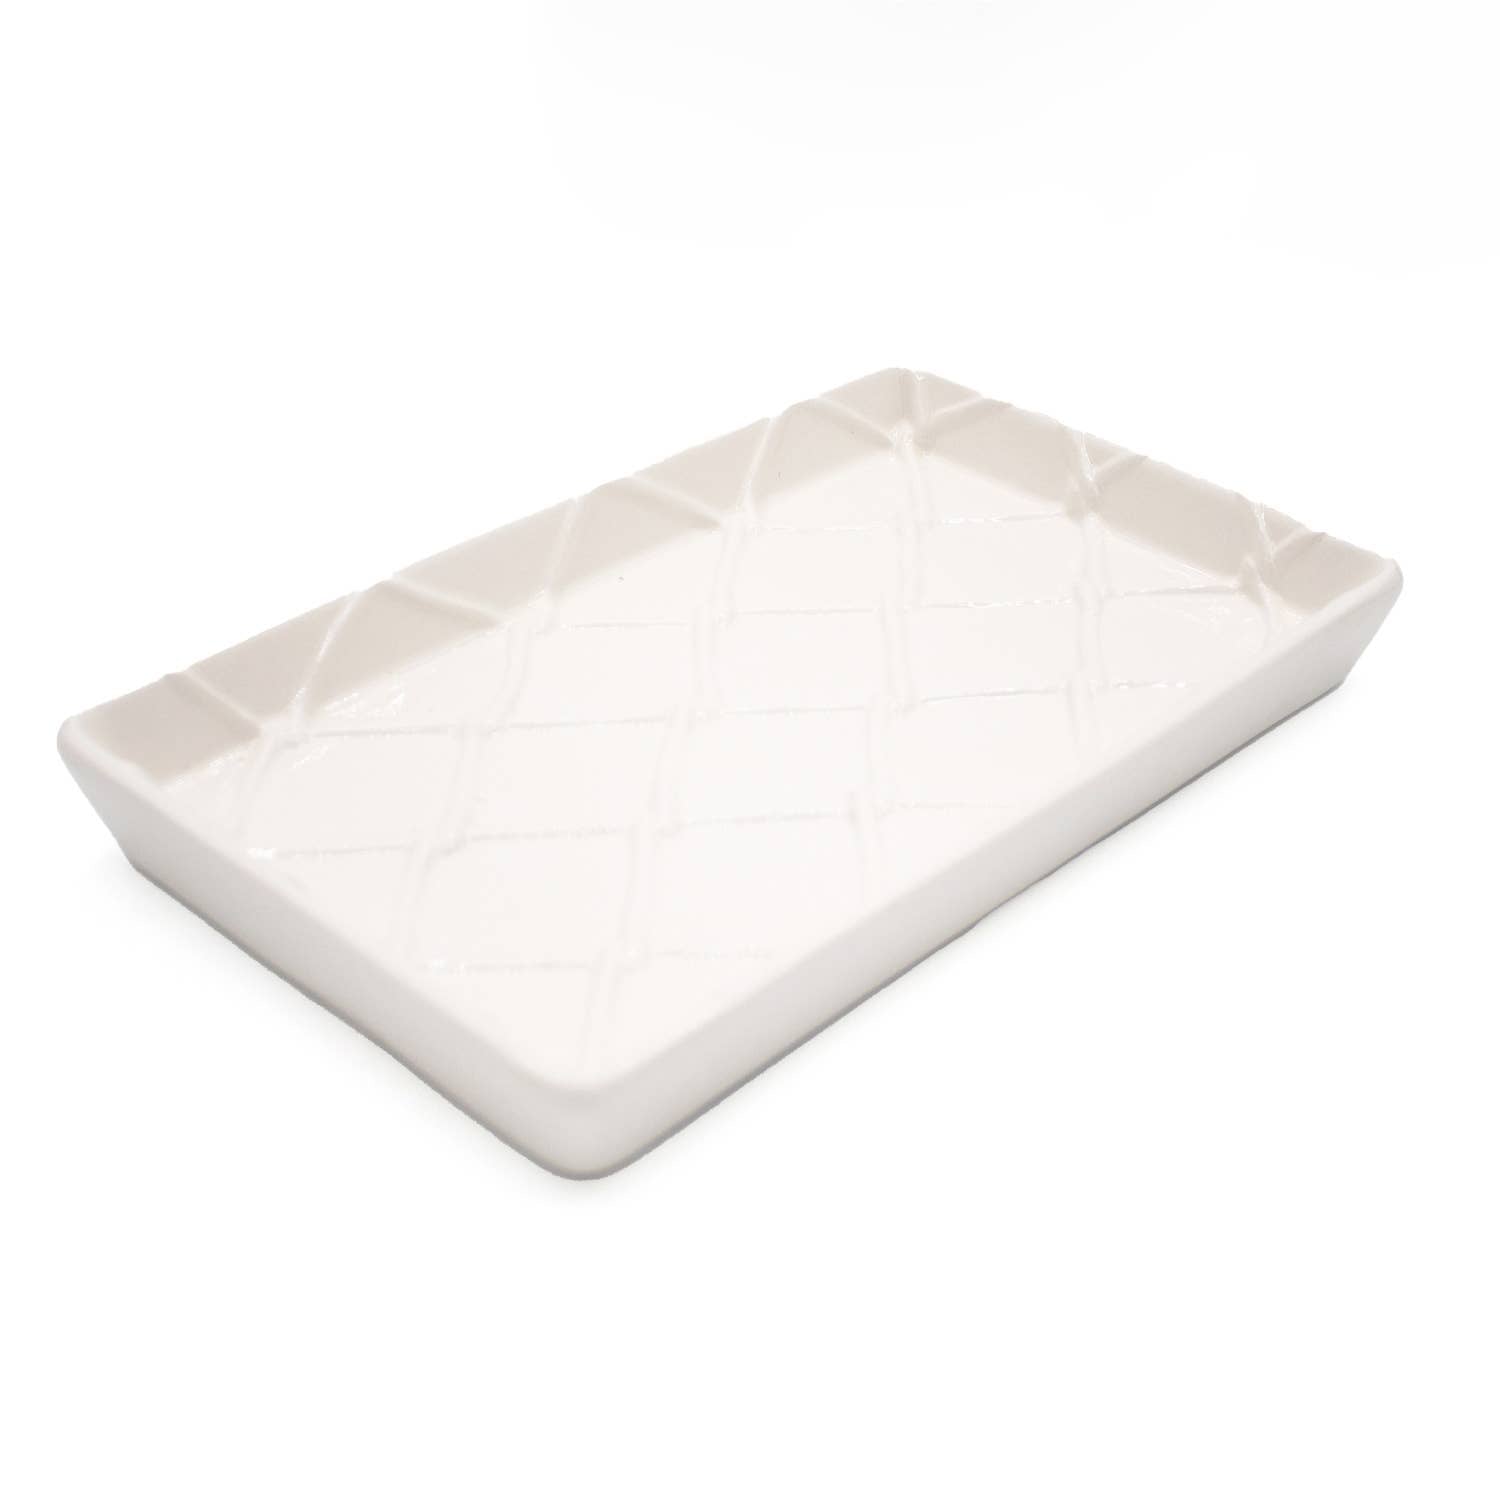 White Textured Guest Towel Tray - The Preppy Bunny